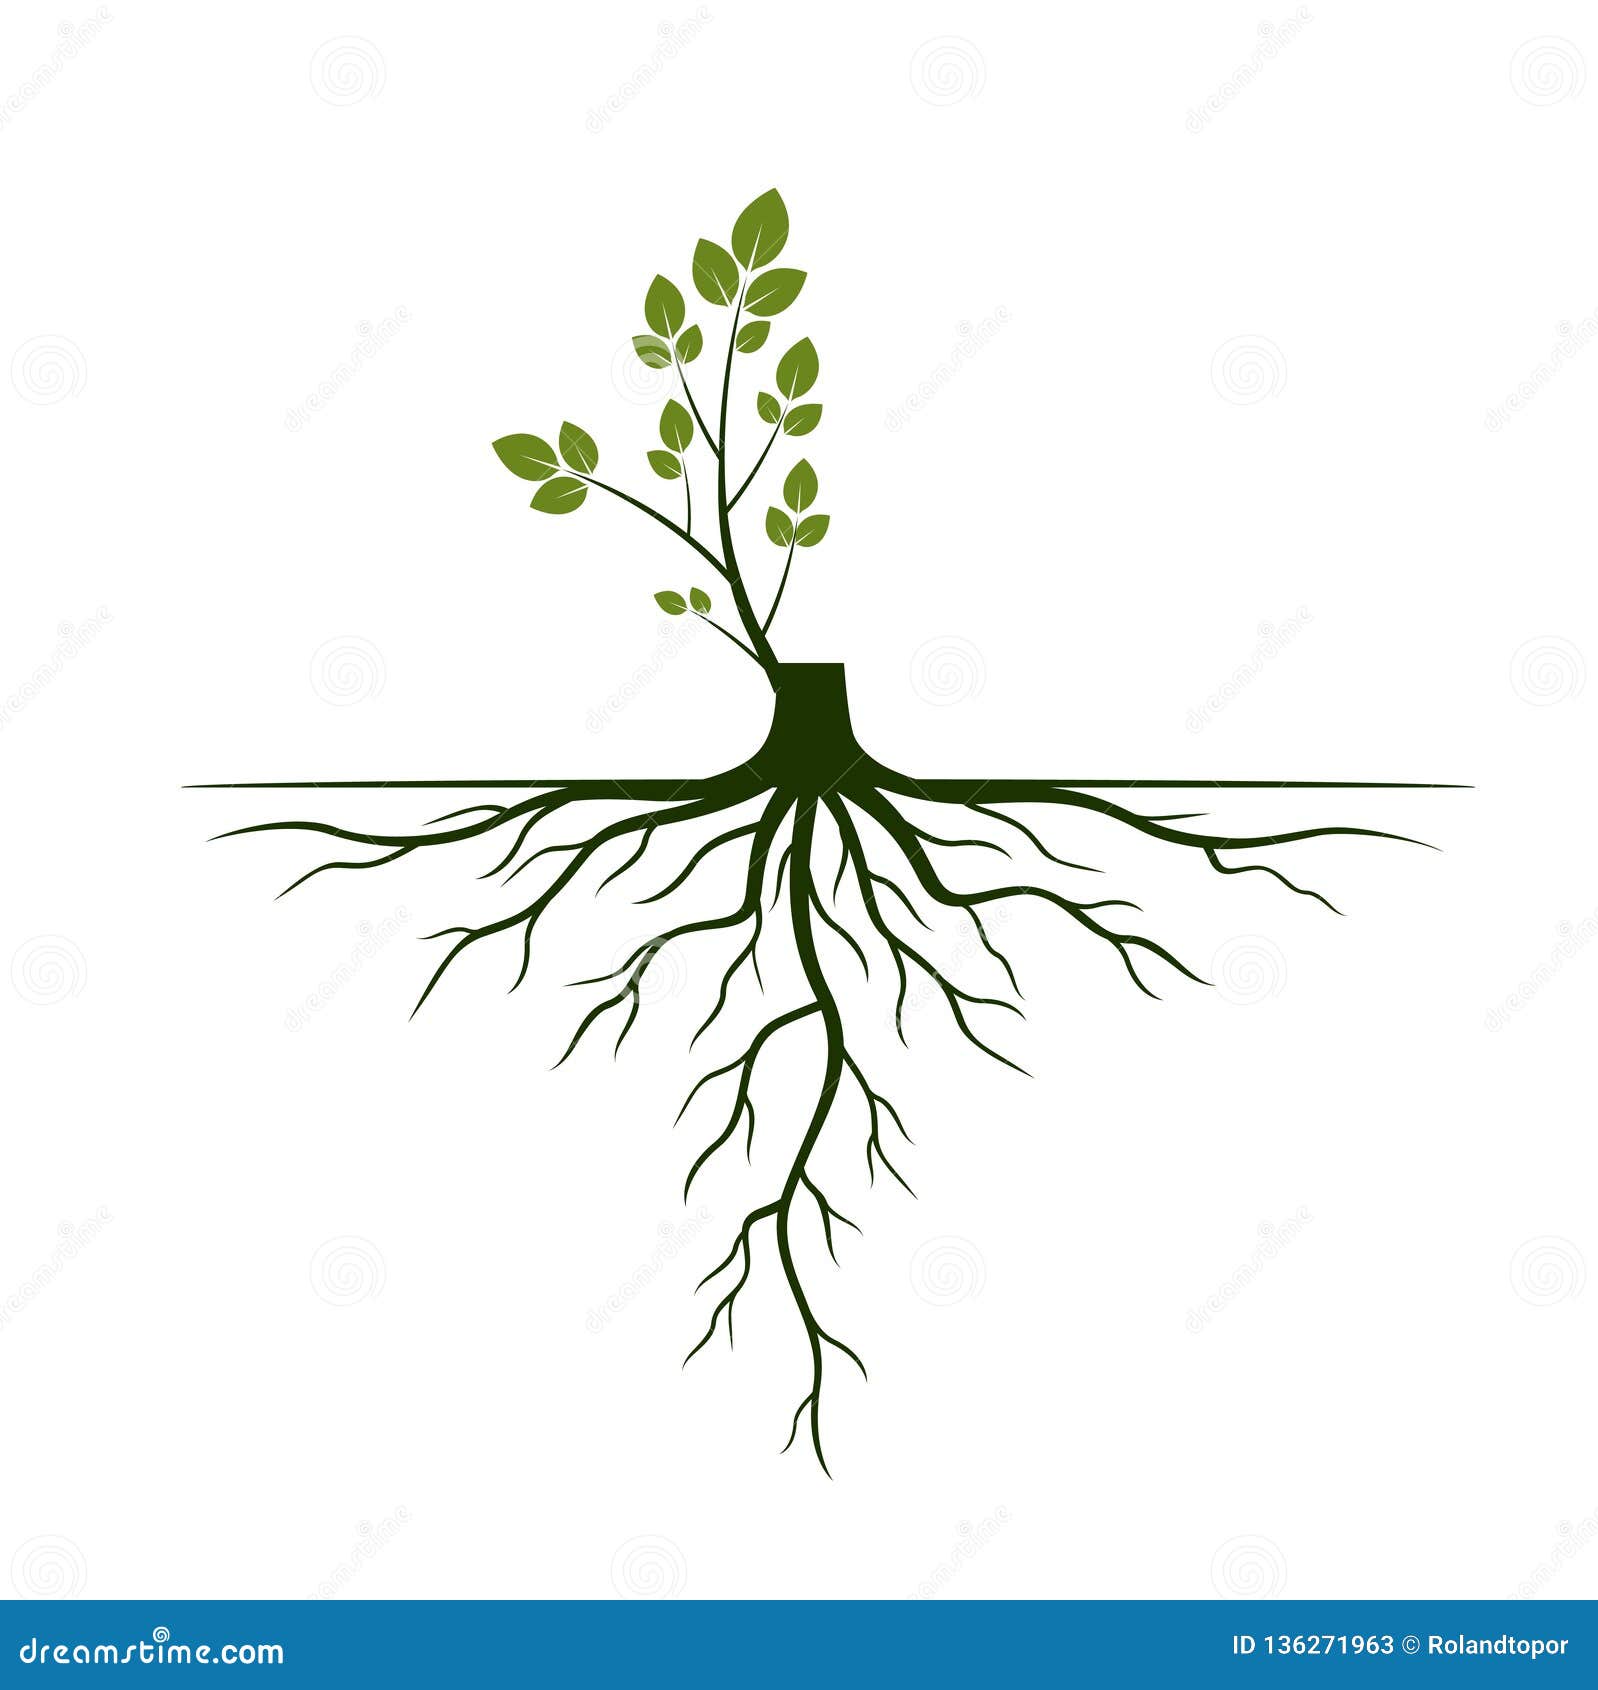 tree roots and germinate limb. roots of plants.  